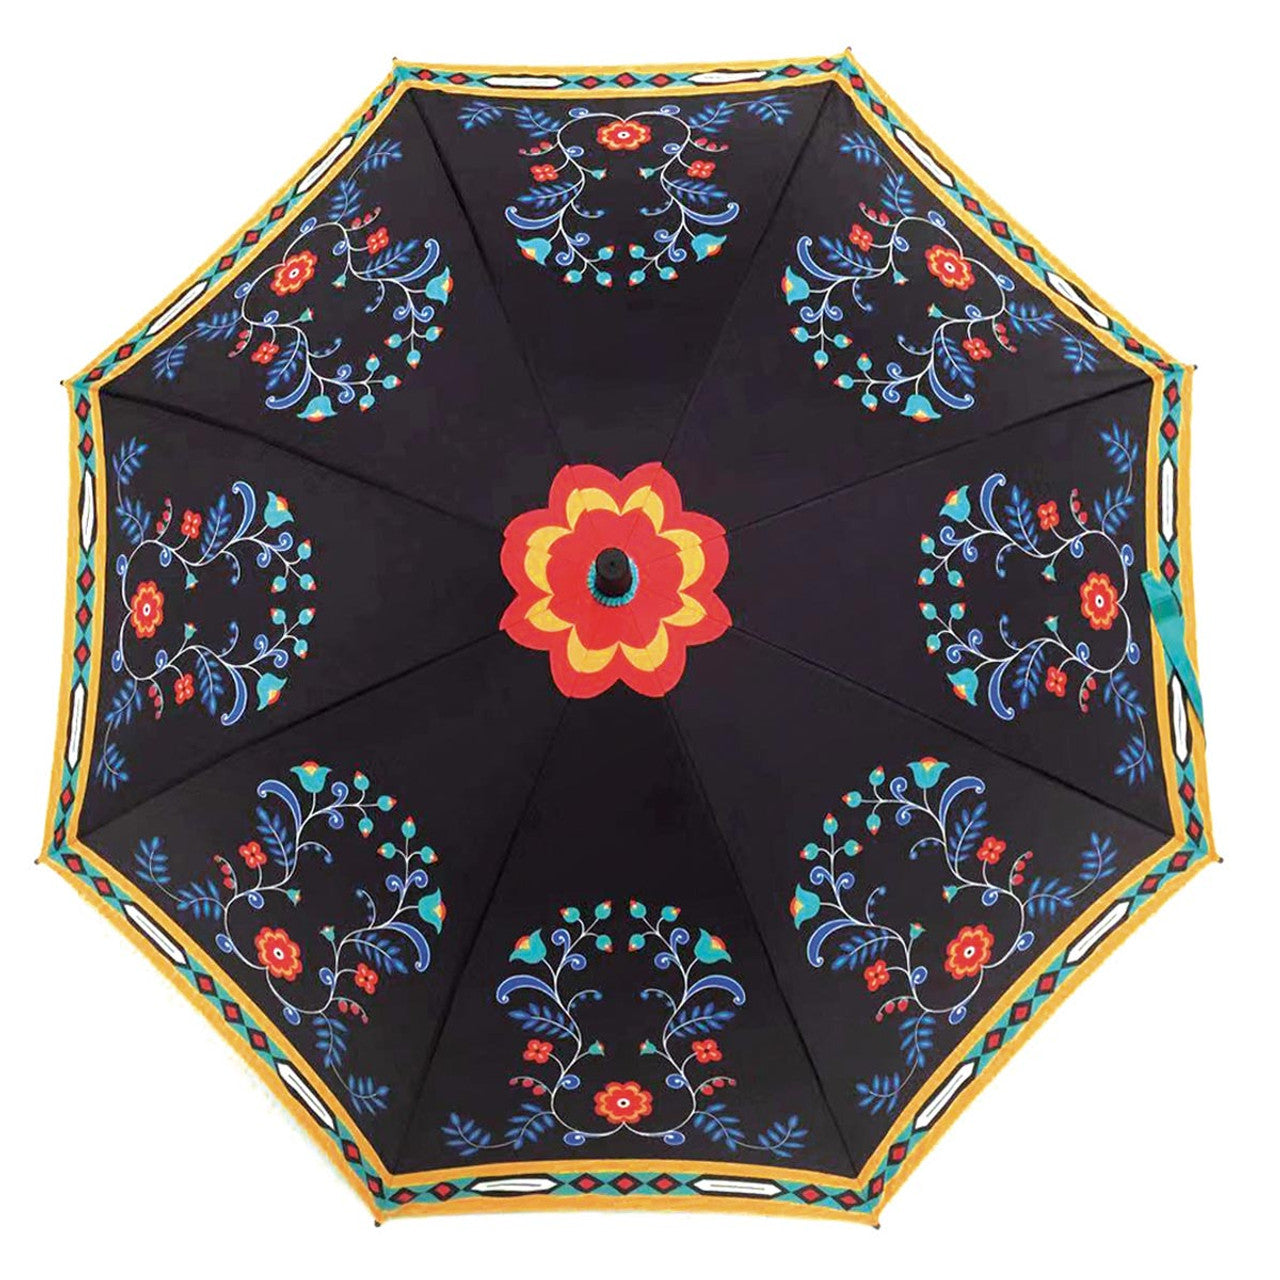 Double Layer Umbrella, Honoring Our Life Givers